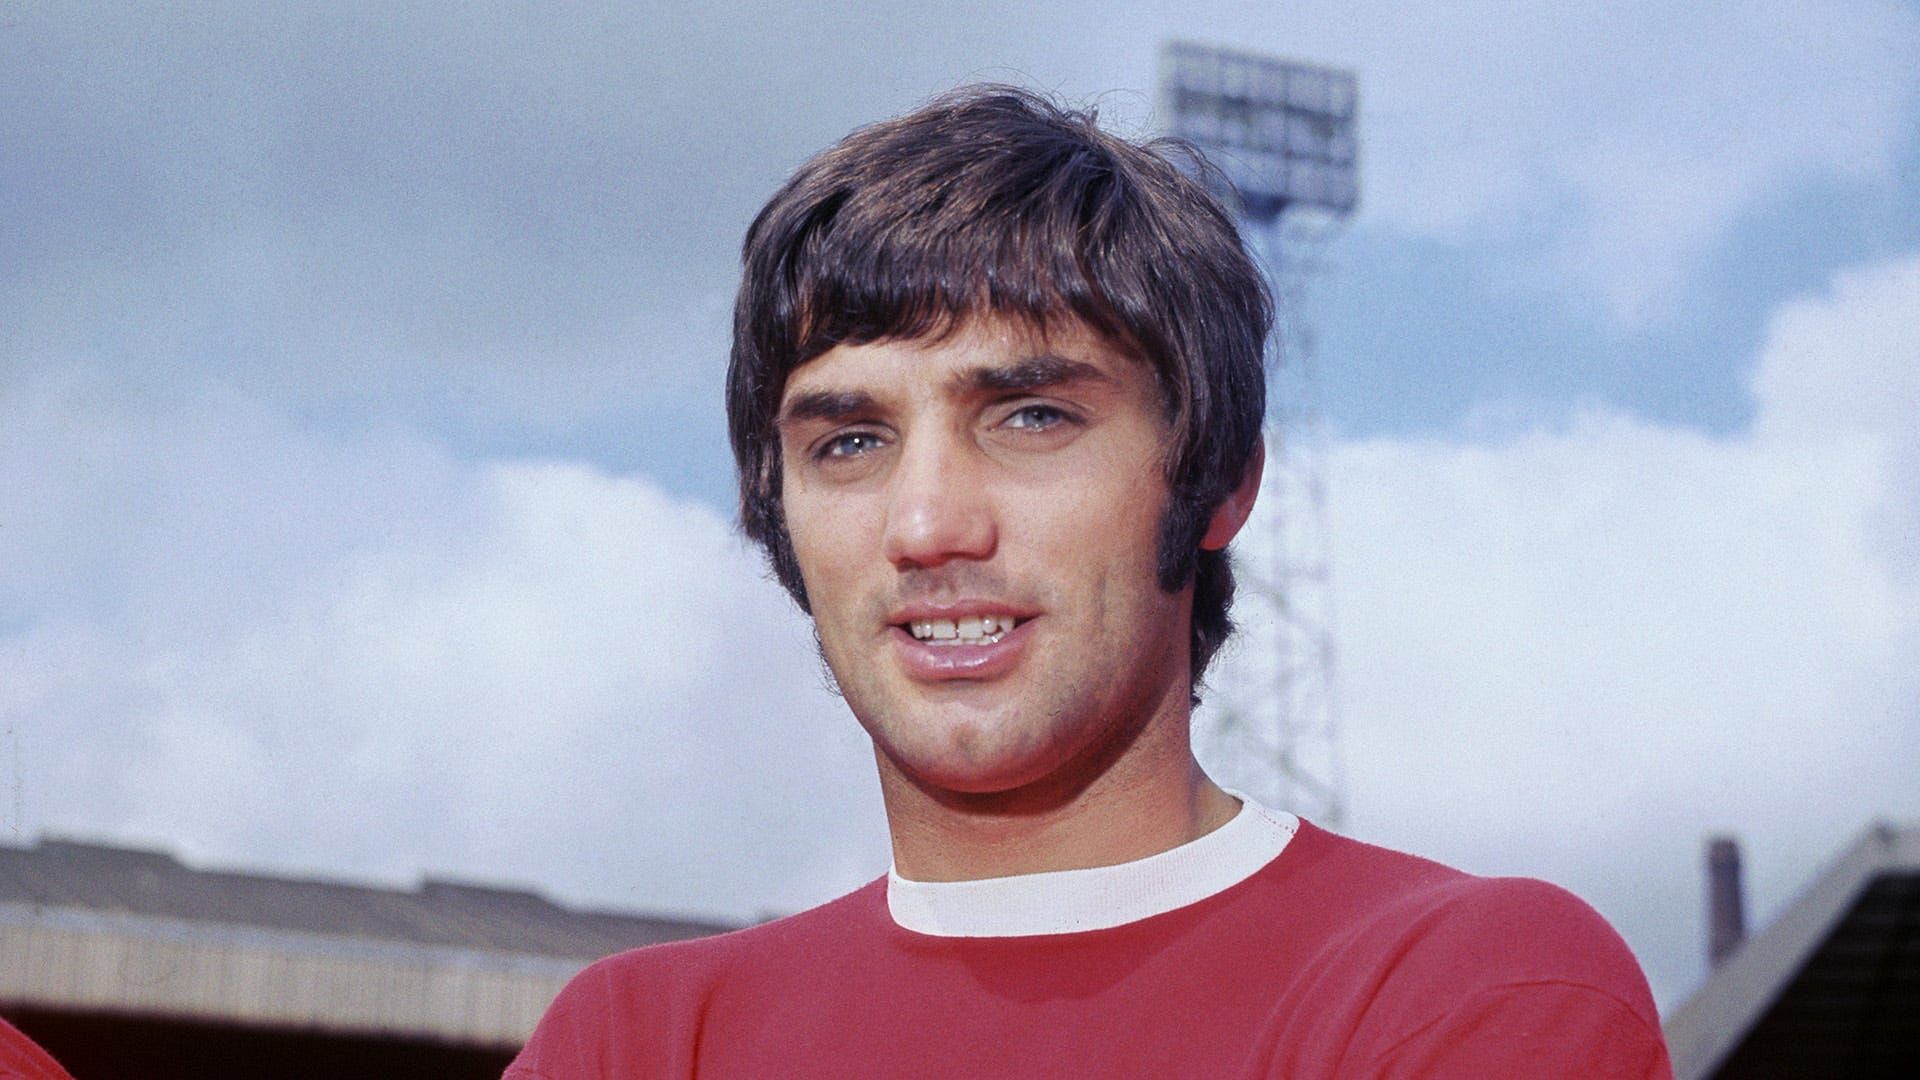 A young George Best (photo cred: Goal)